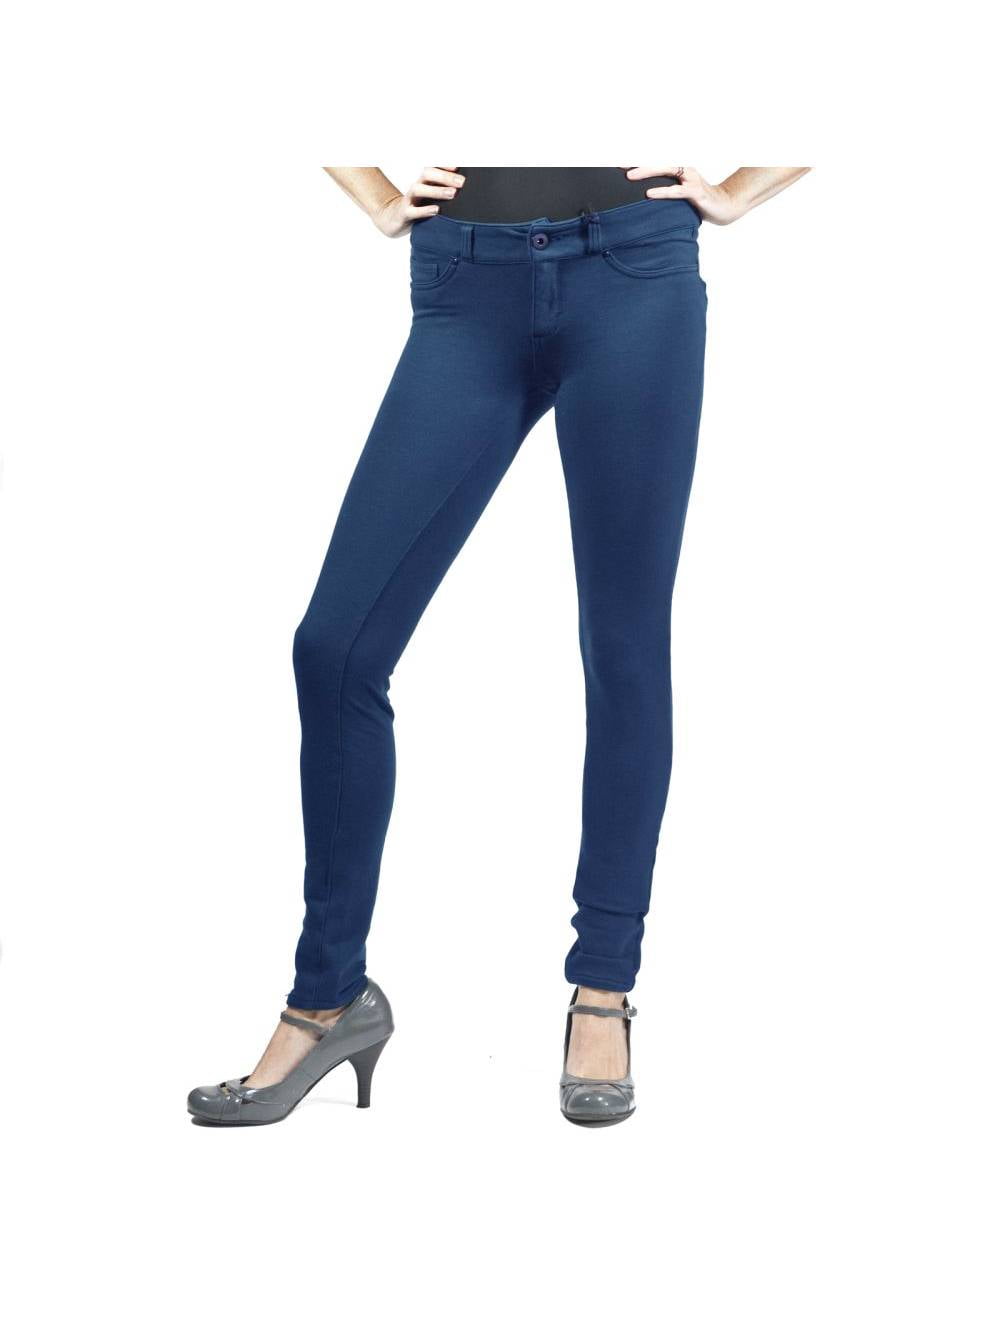 Women's Classic Blue and Black Jeggings Soft Skinny Stretch Pants